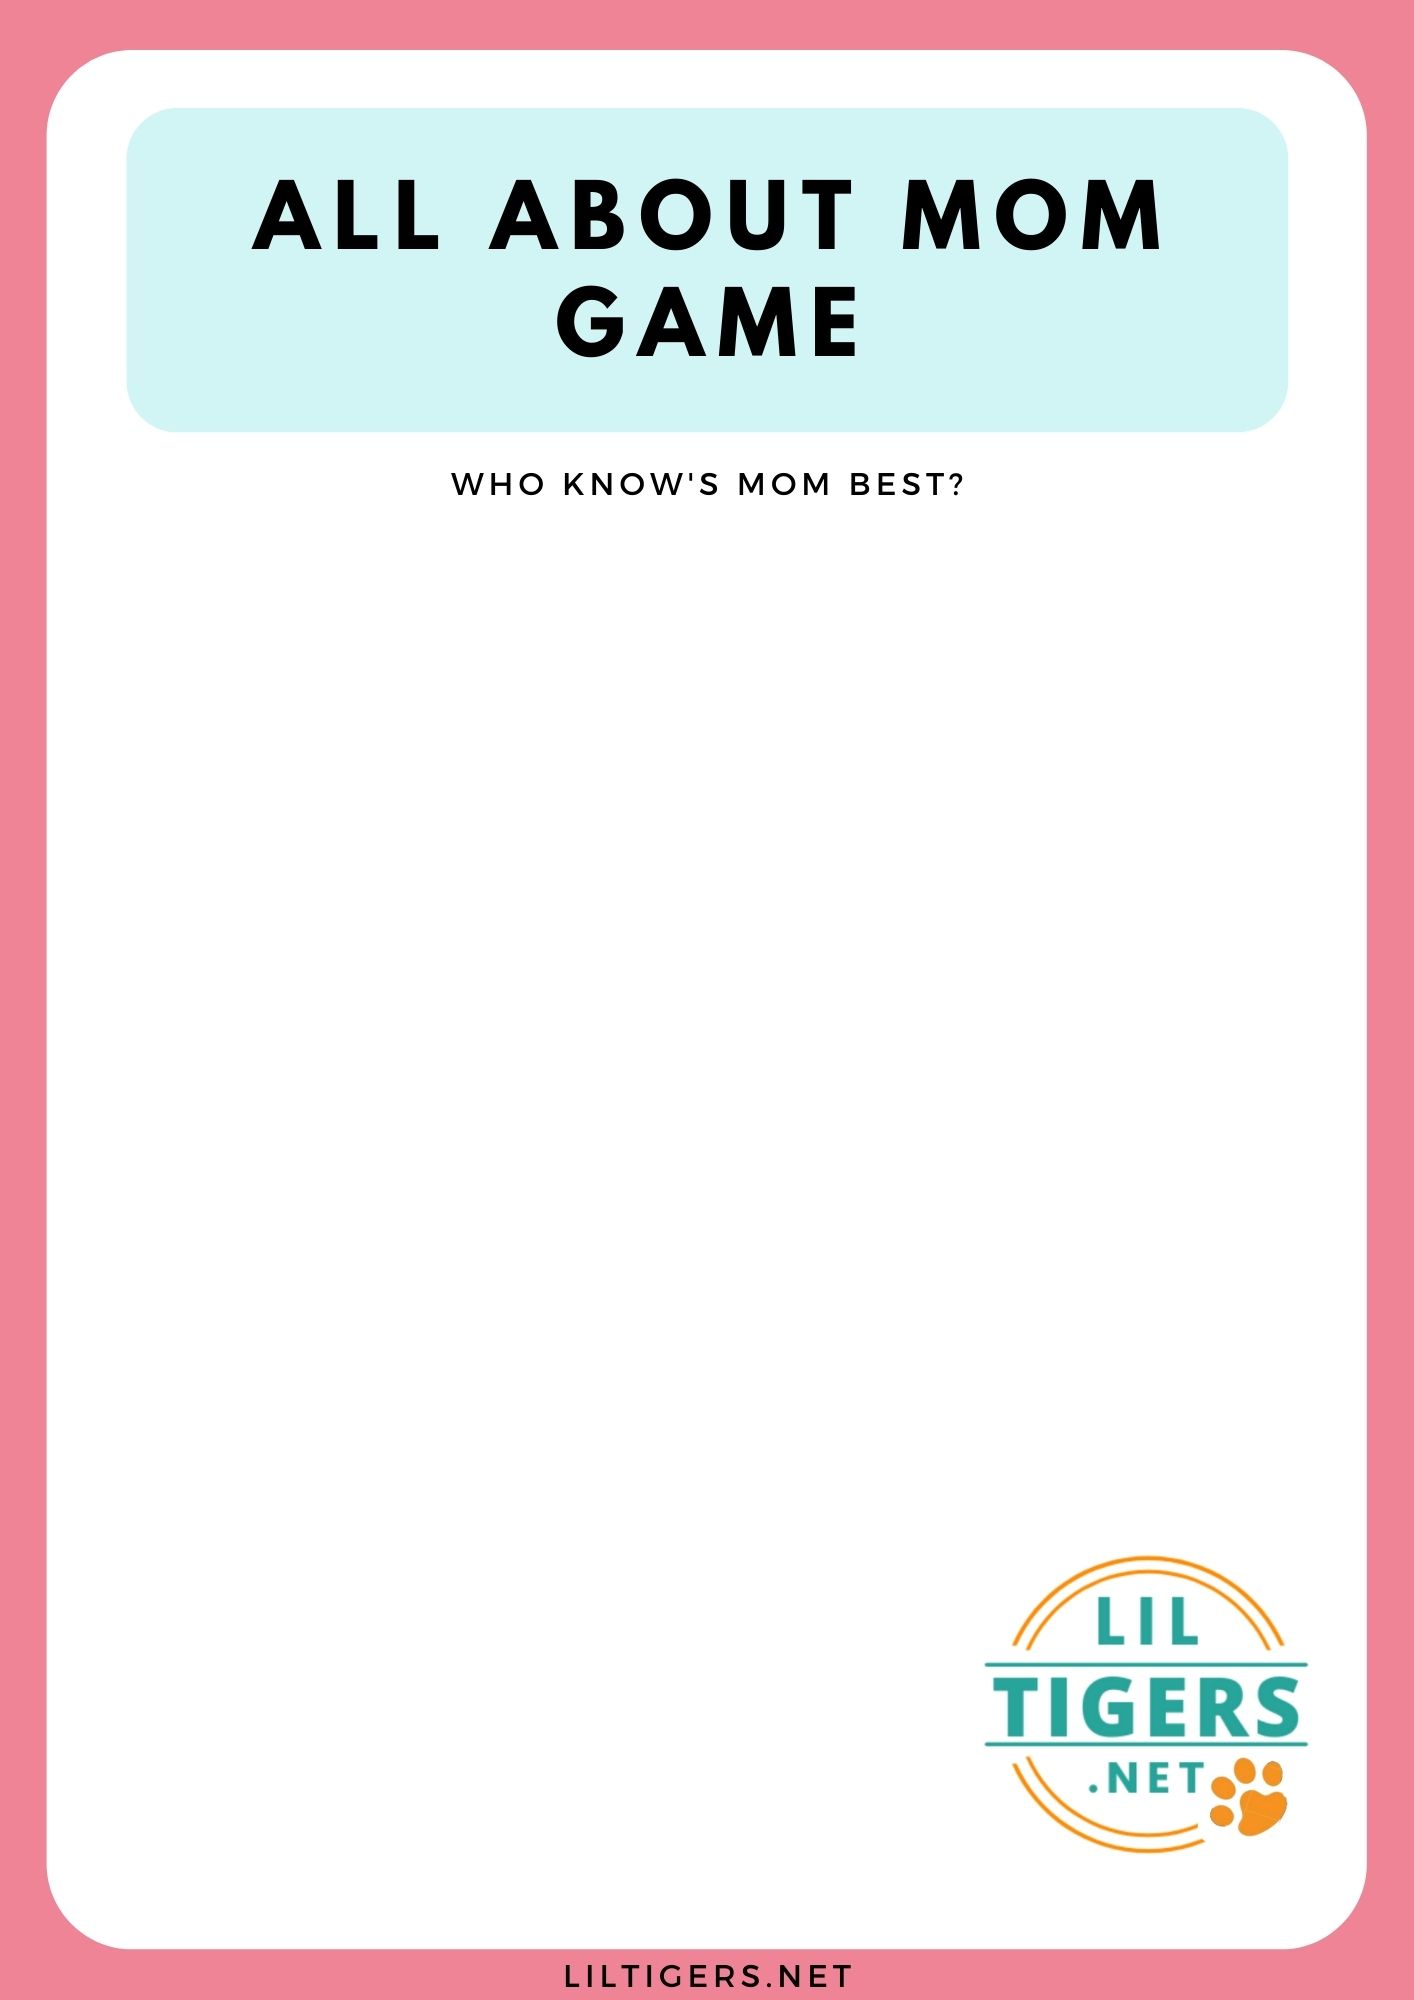 All About Mom Game Plain Template